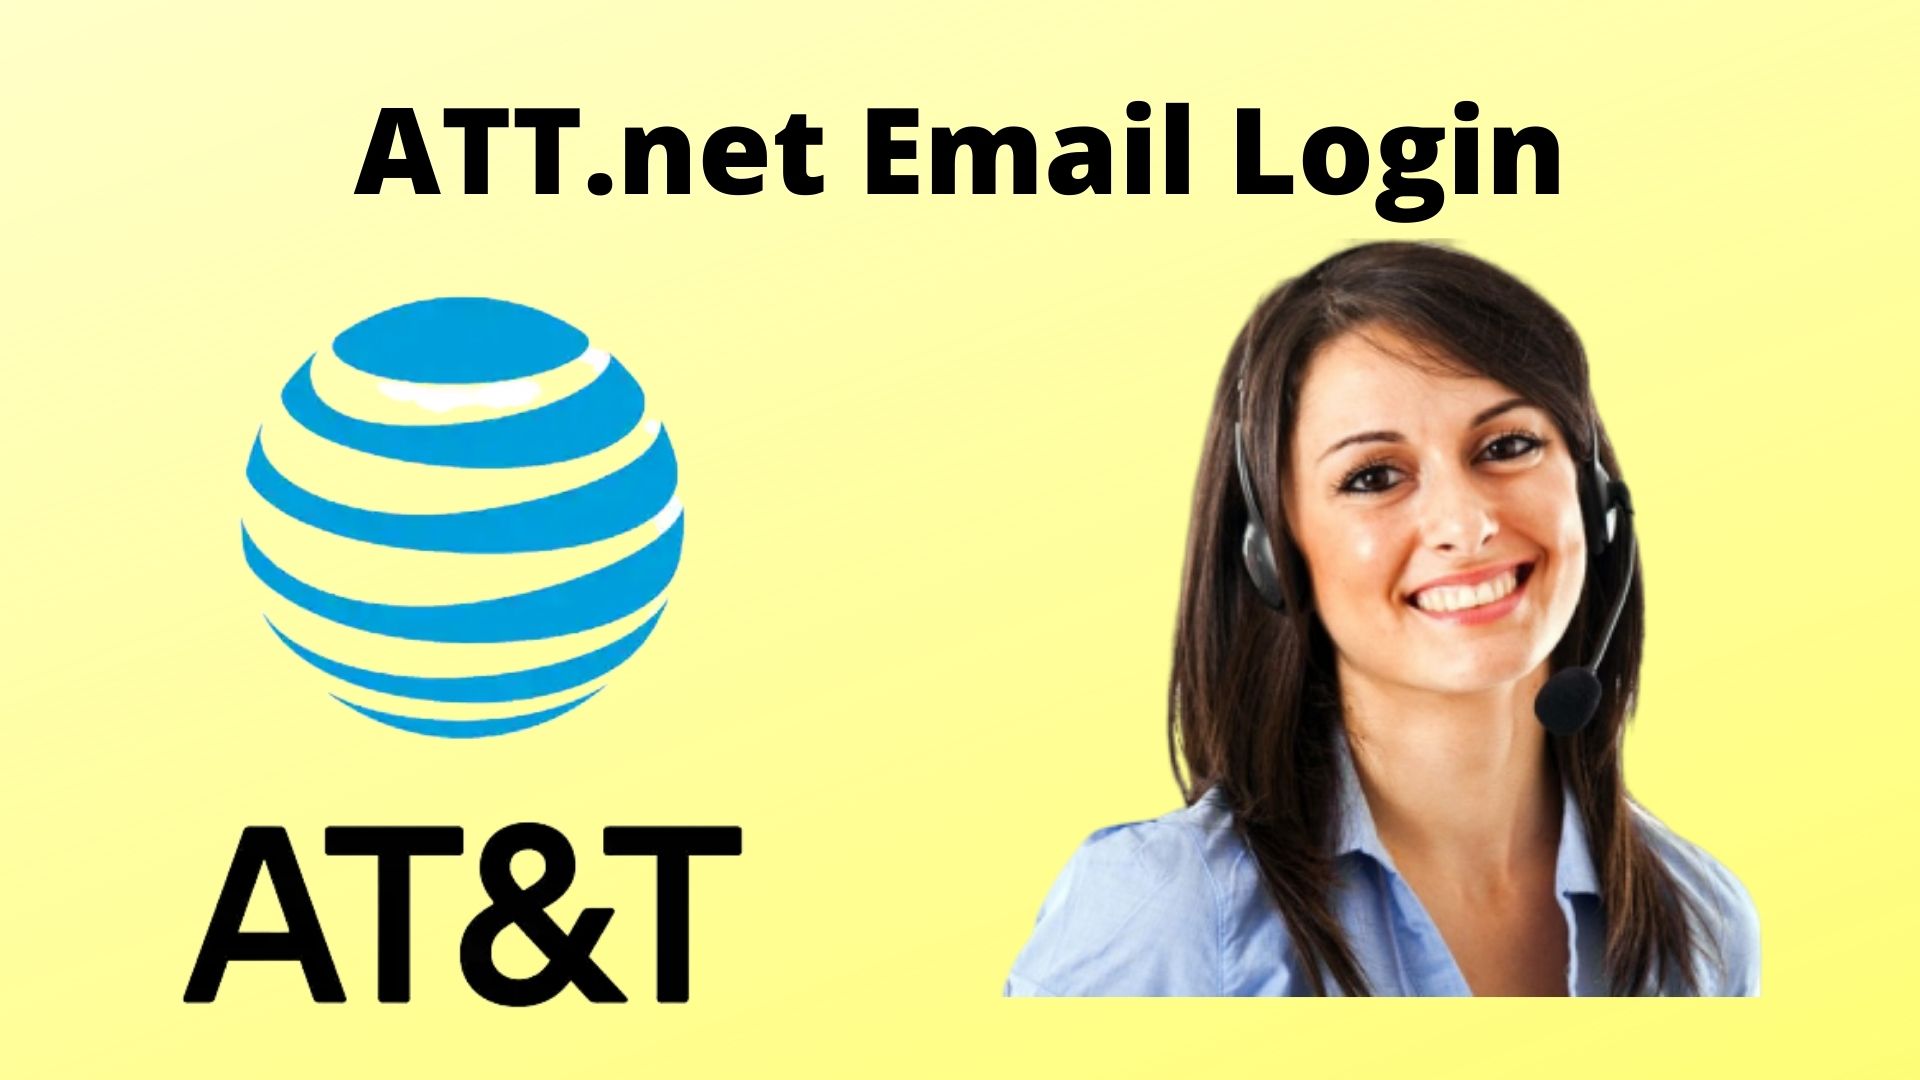 Article about Procedure to Login and Configuration of ATT Email Account